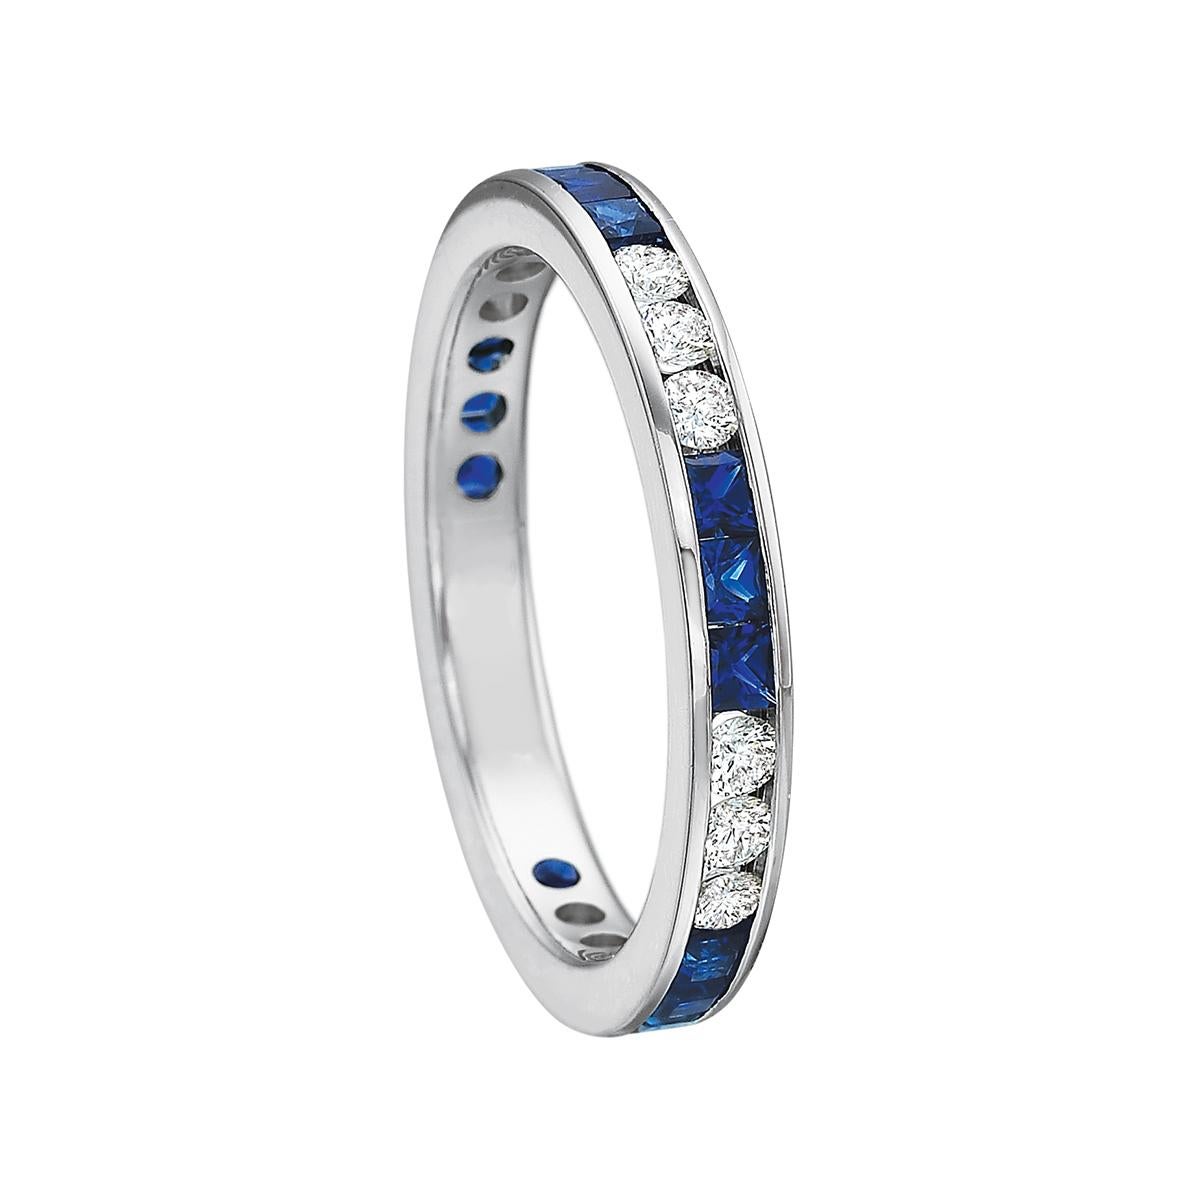 Channel-set eternity band ring, featuring three princess-cut sapphires alternating with three round-cut diamonds, in polished platinum.

Fifteen sapphires weighing 0.90 total carats
Fifteen diamonds weighing 0.50 total carats
3mm wide
Size 6
